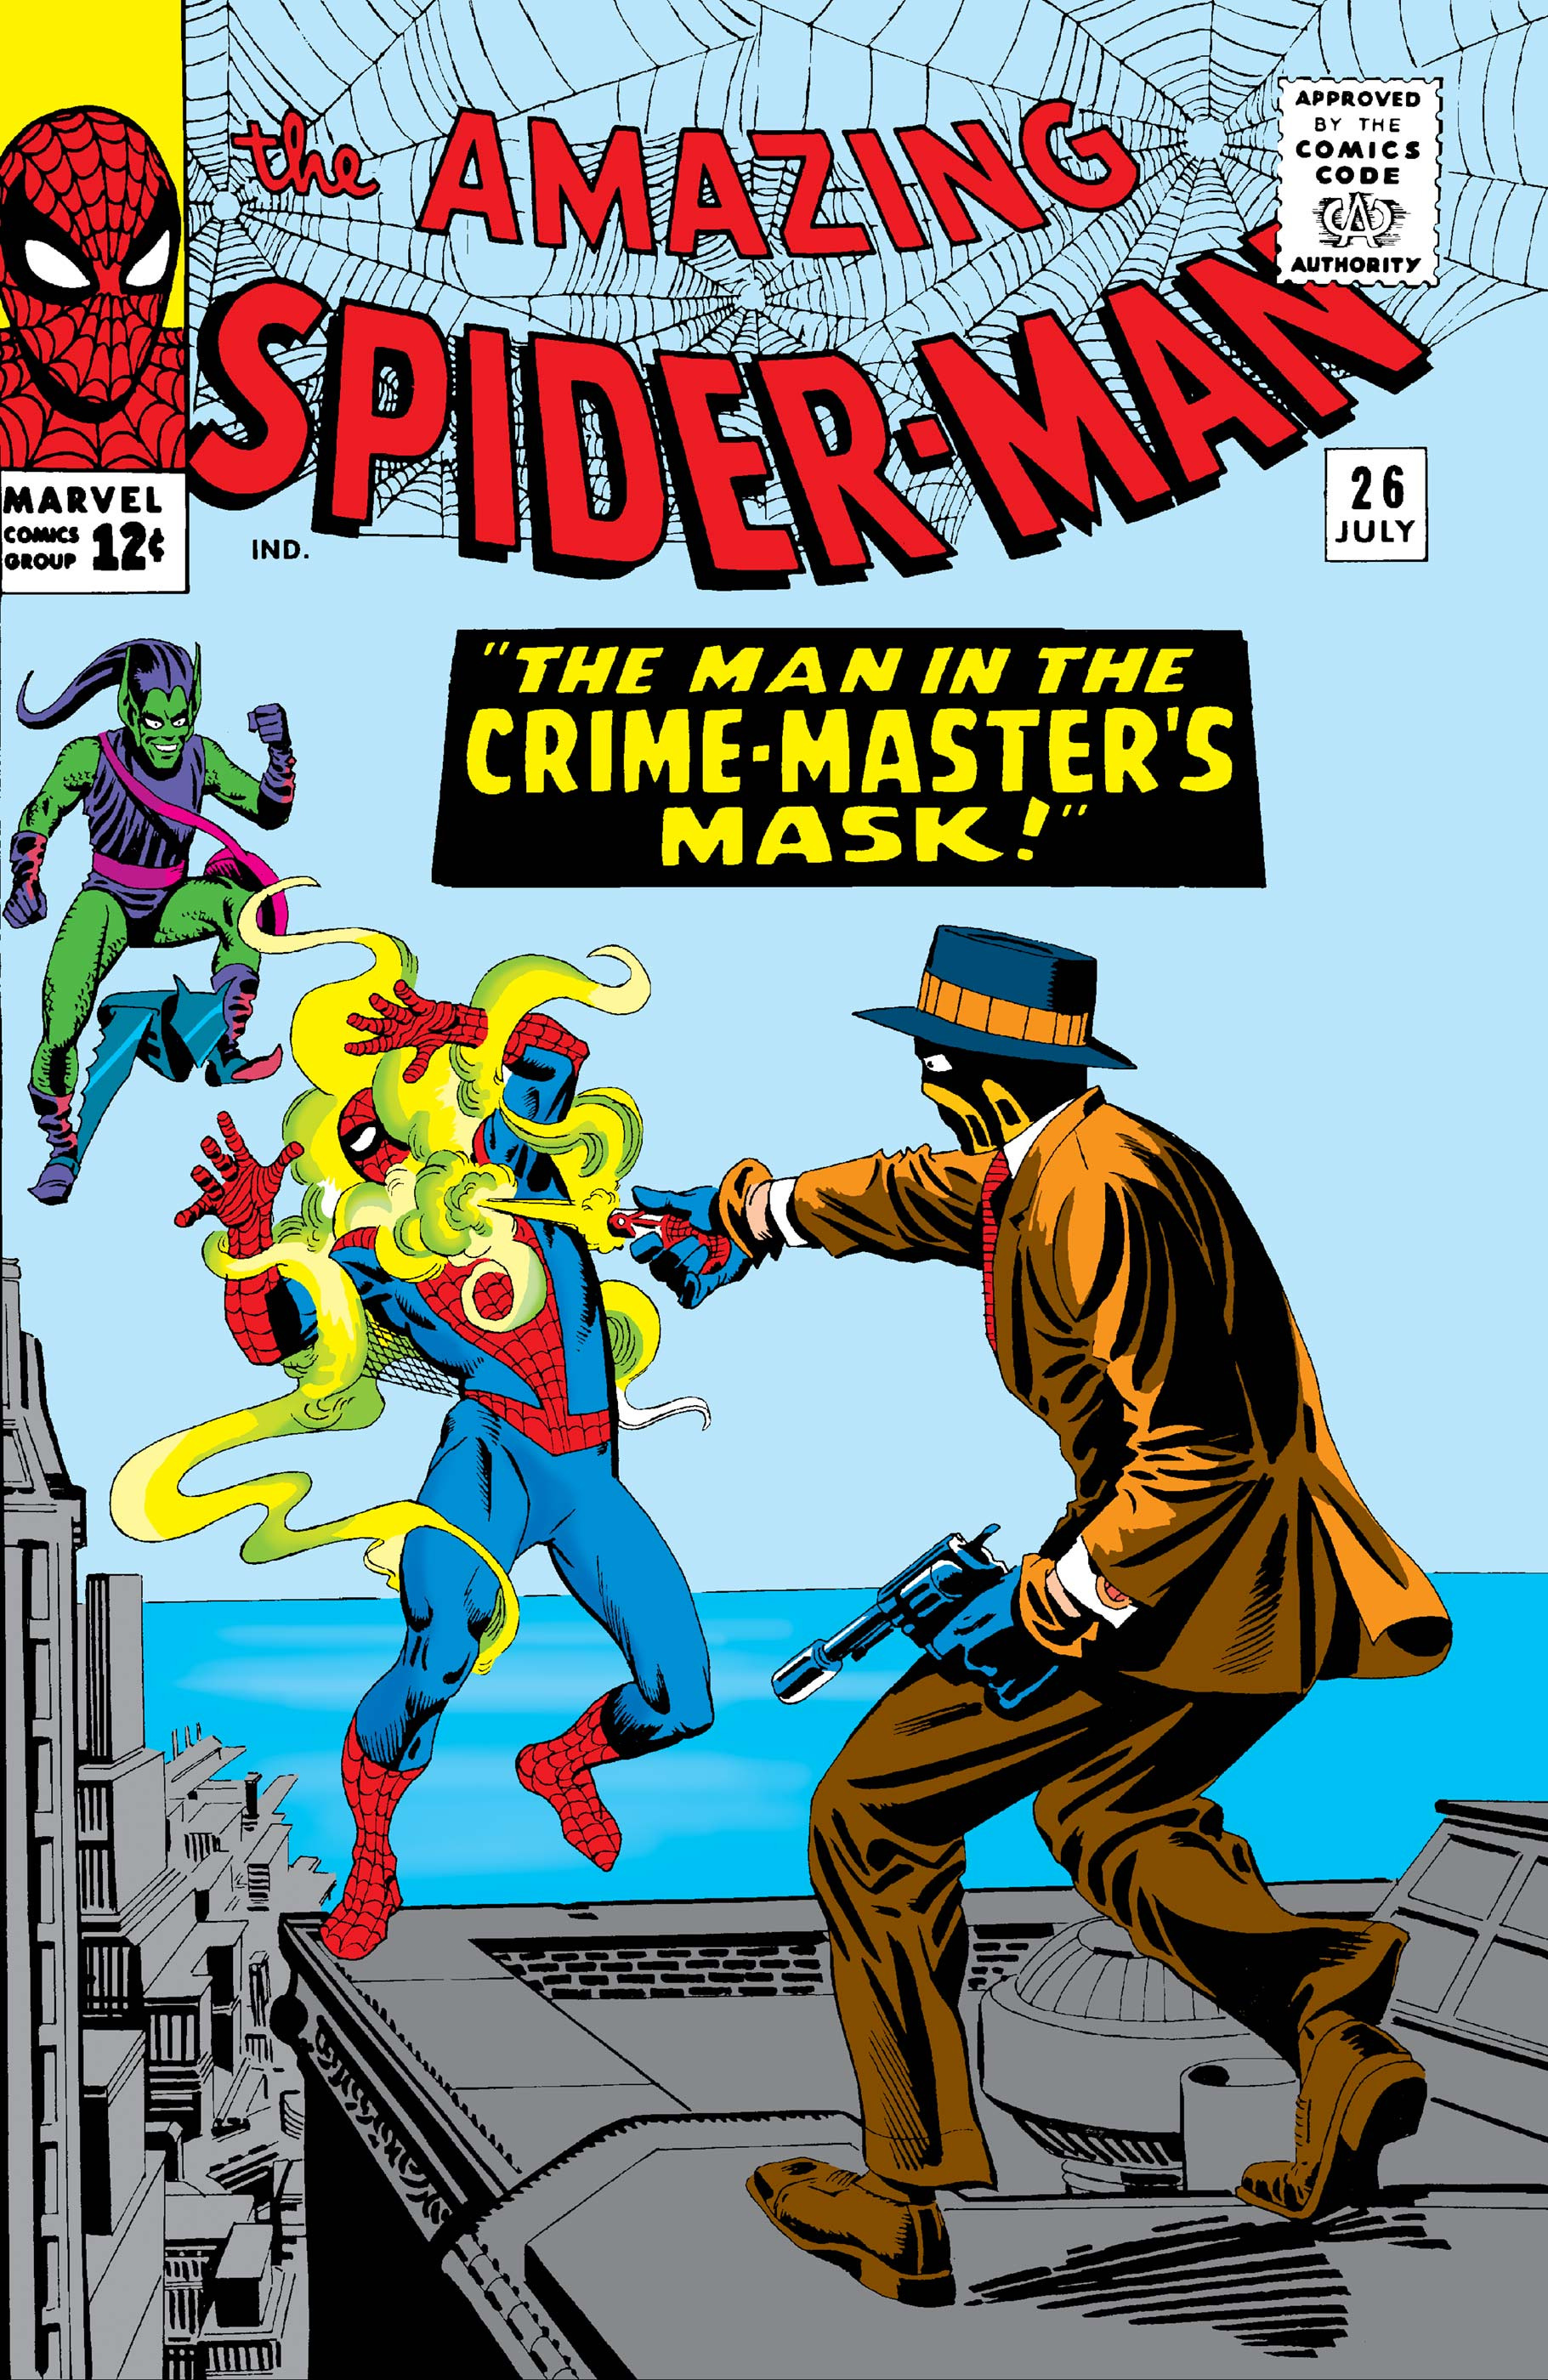 E206: When they tell you what they are, believe them (Amazing Spider-Man #26) -- June 1965